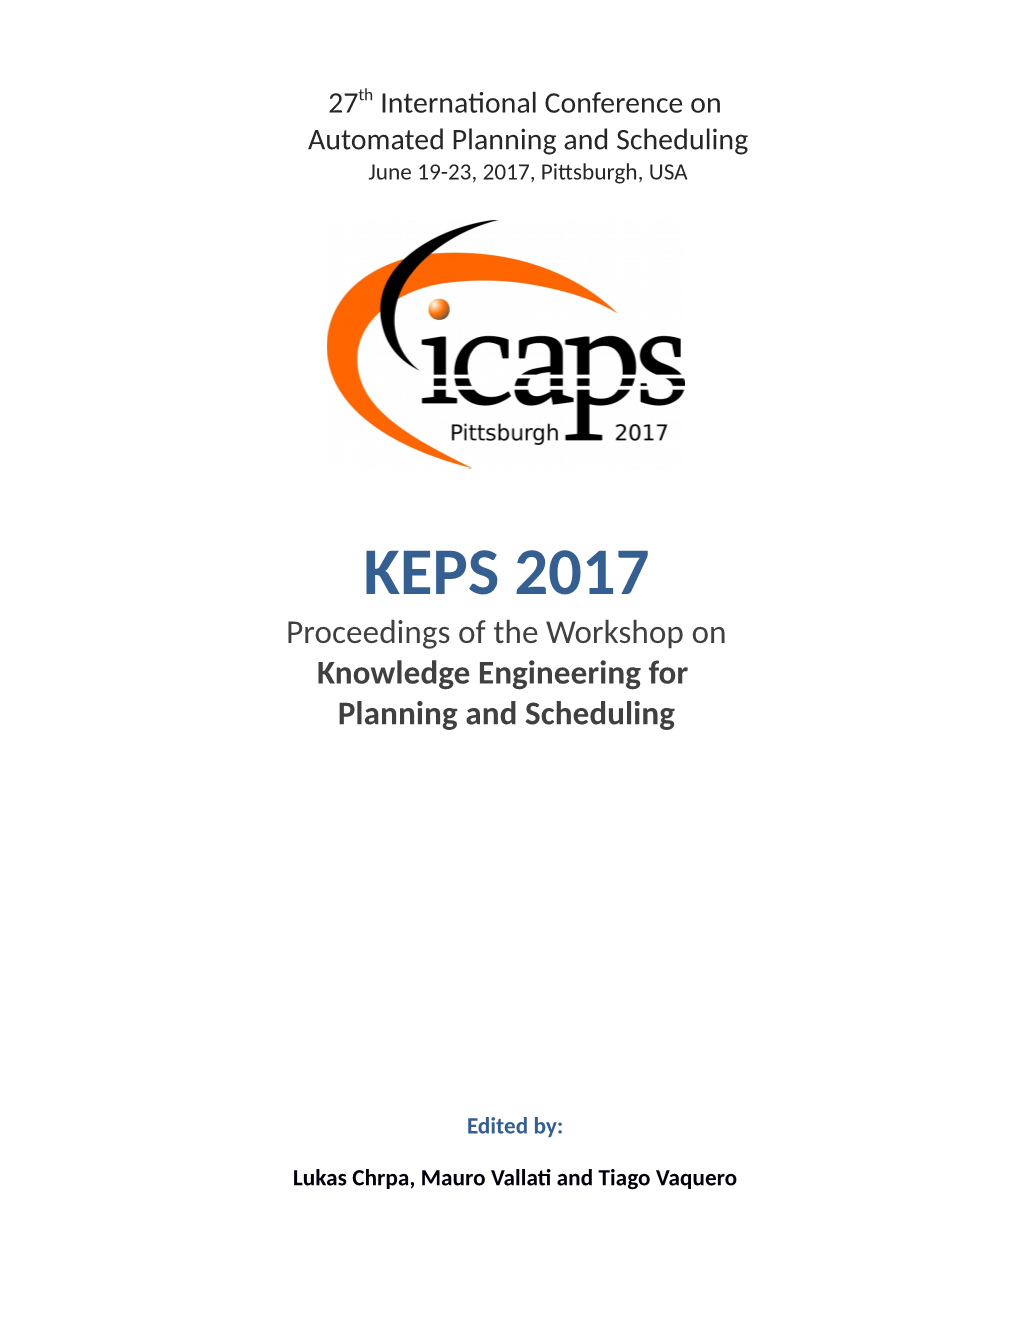 KEPS 2017 Proceedings of the Workshop on Knowledge Engineering for Planning and Scheduling